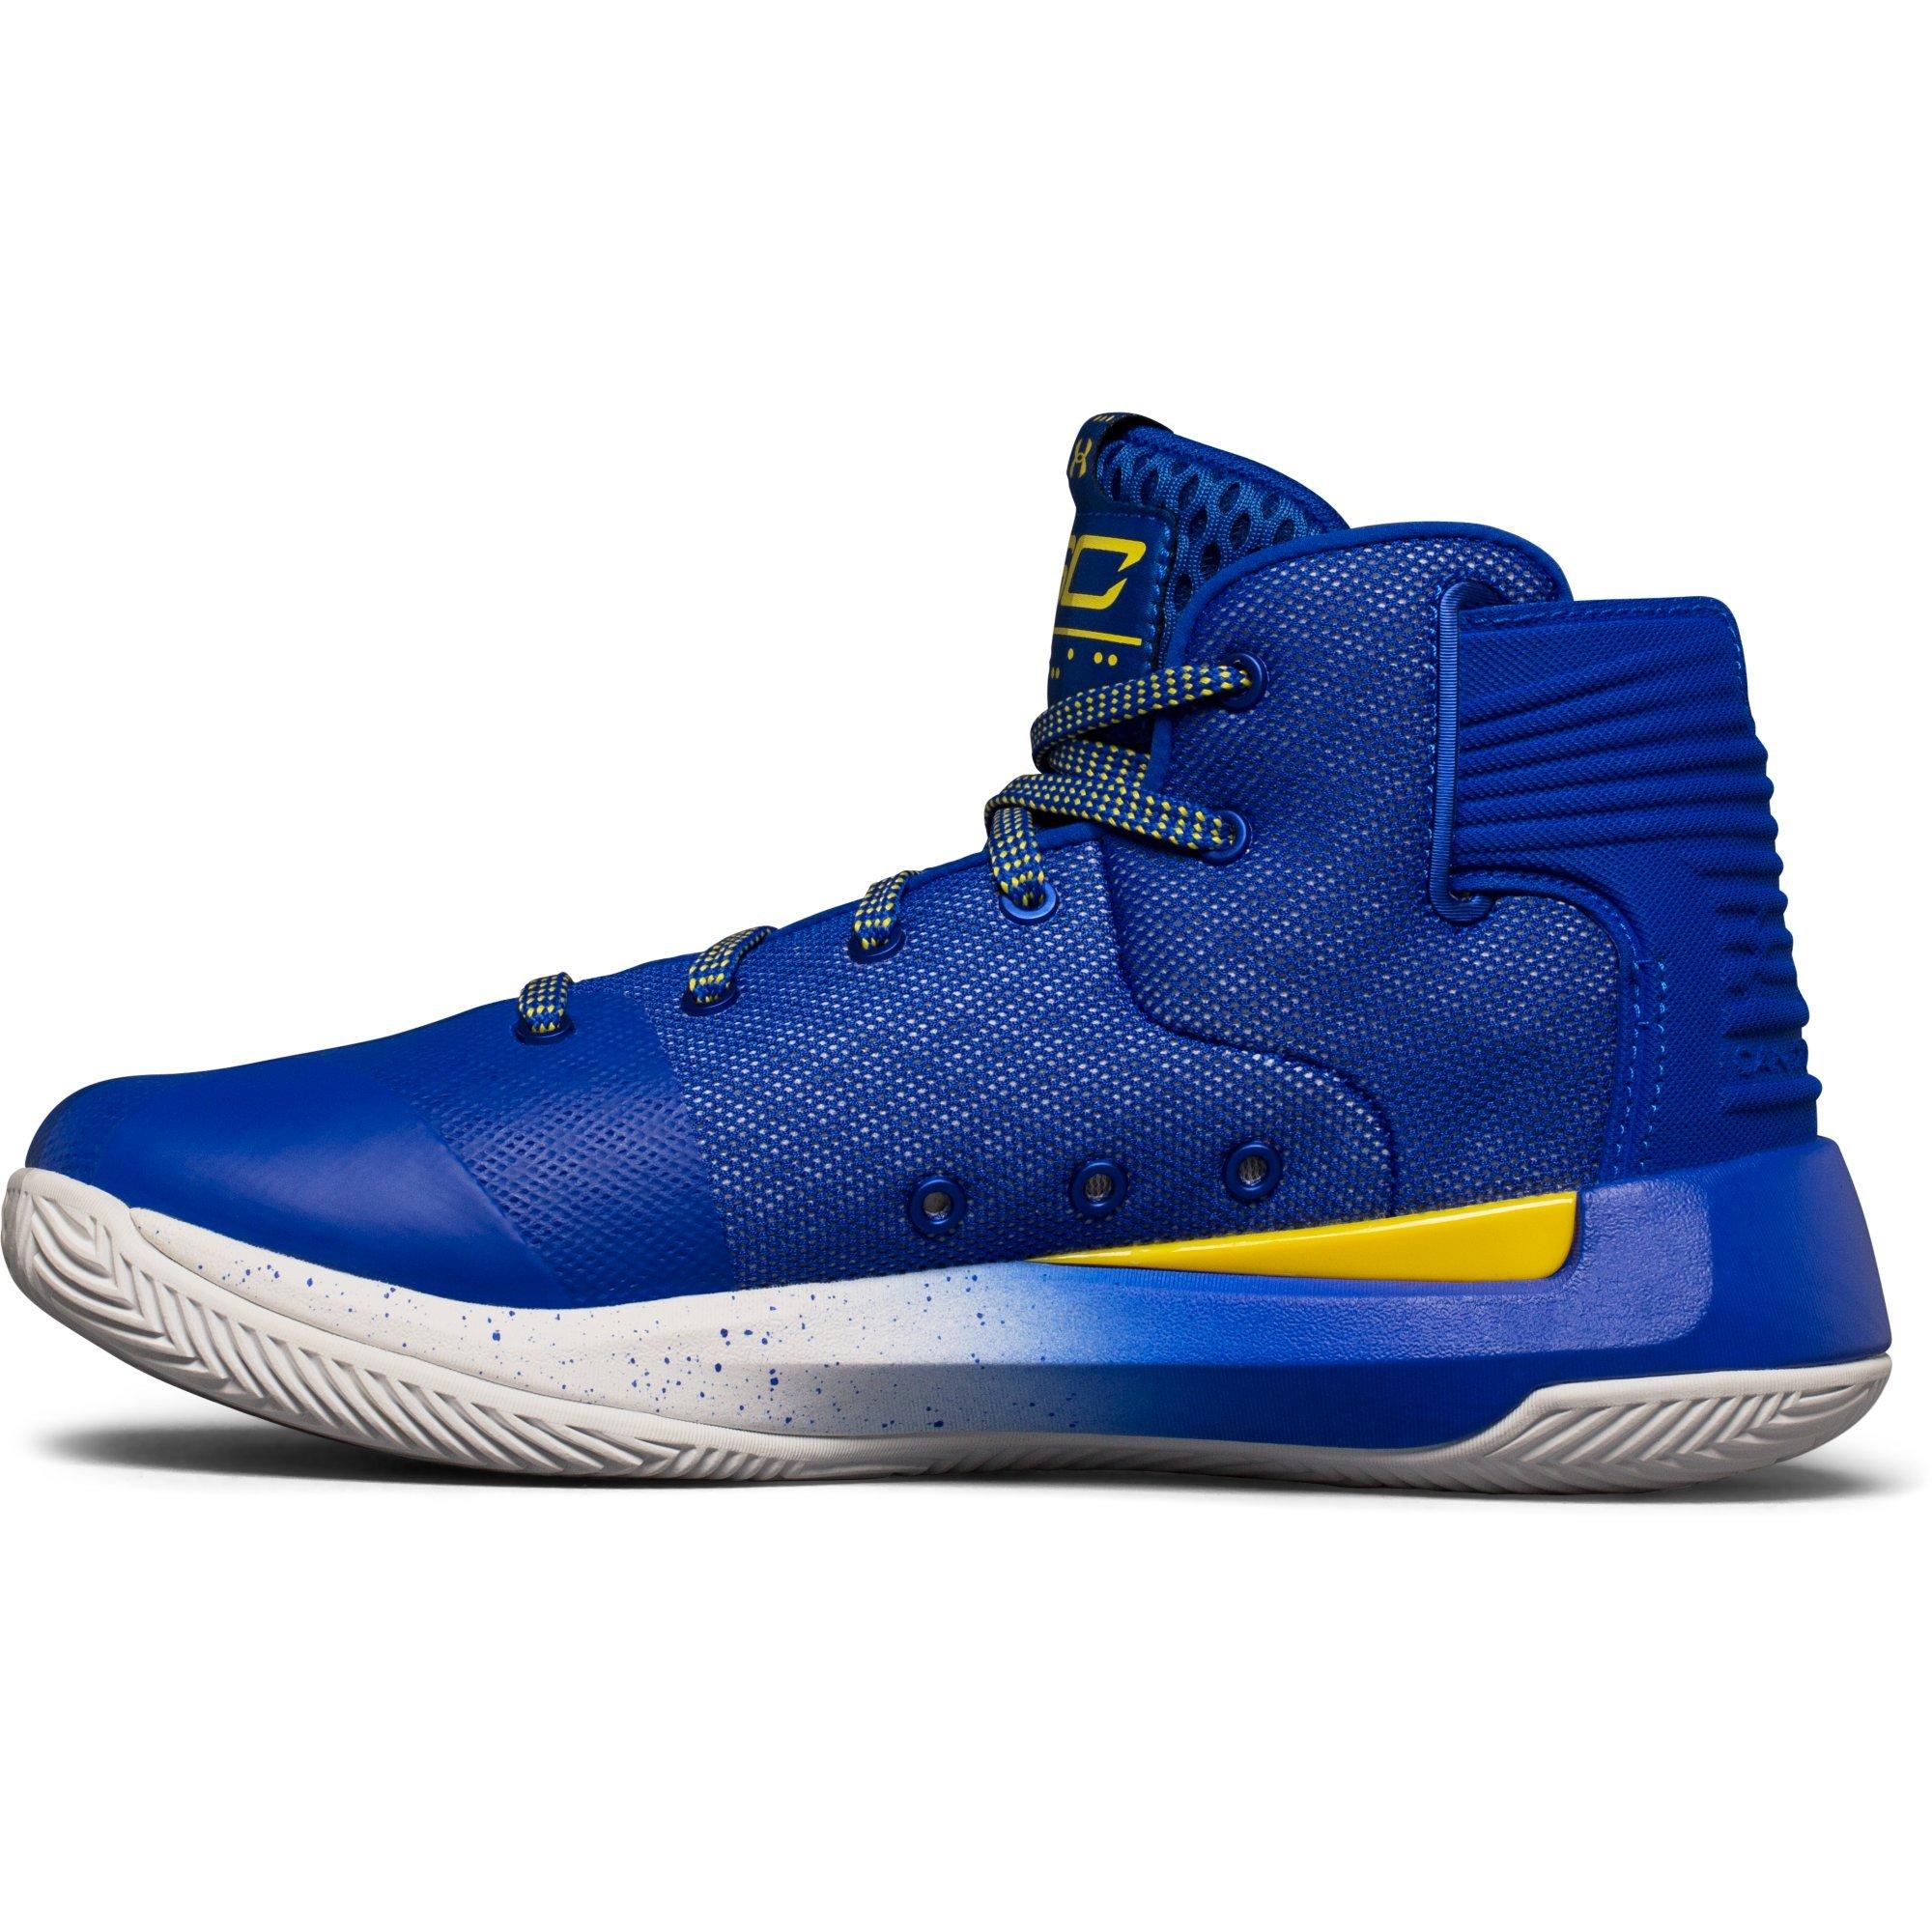 stephen curry shoes blue yellow and white